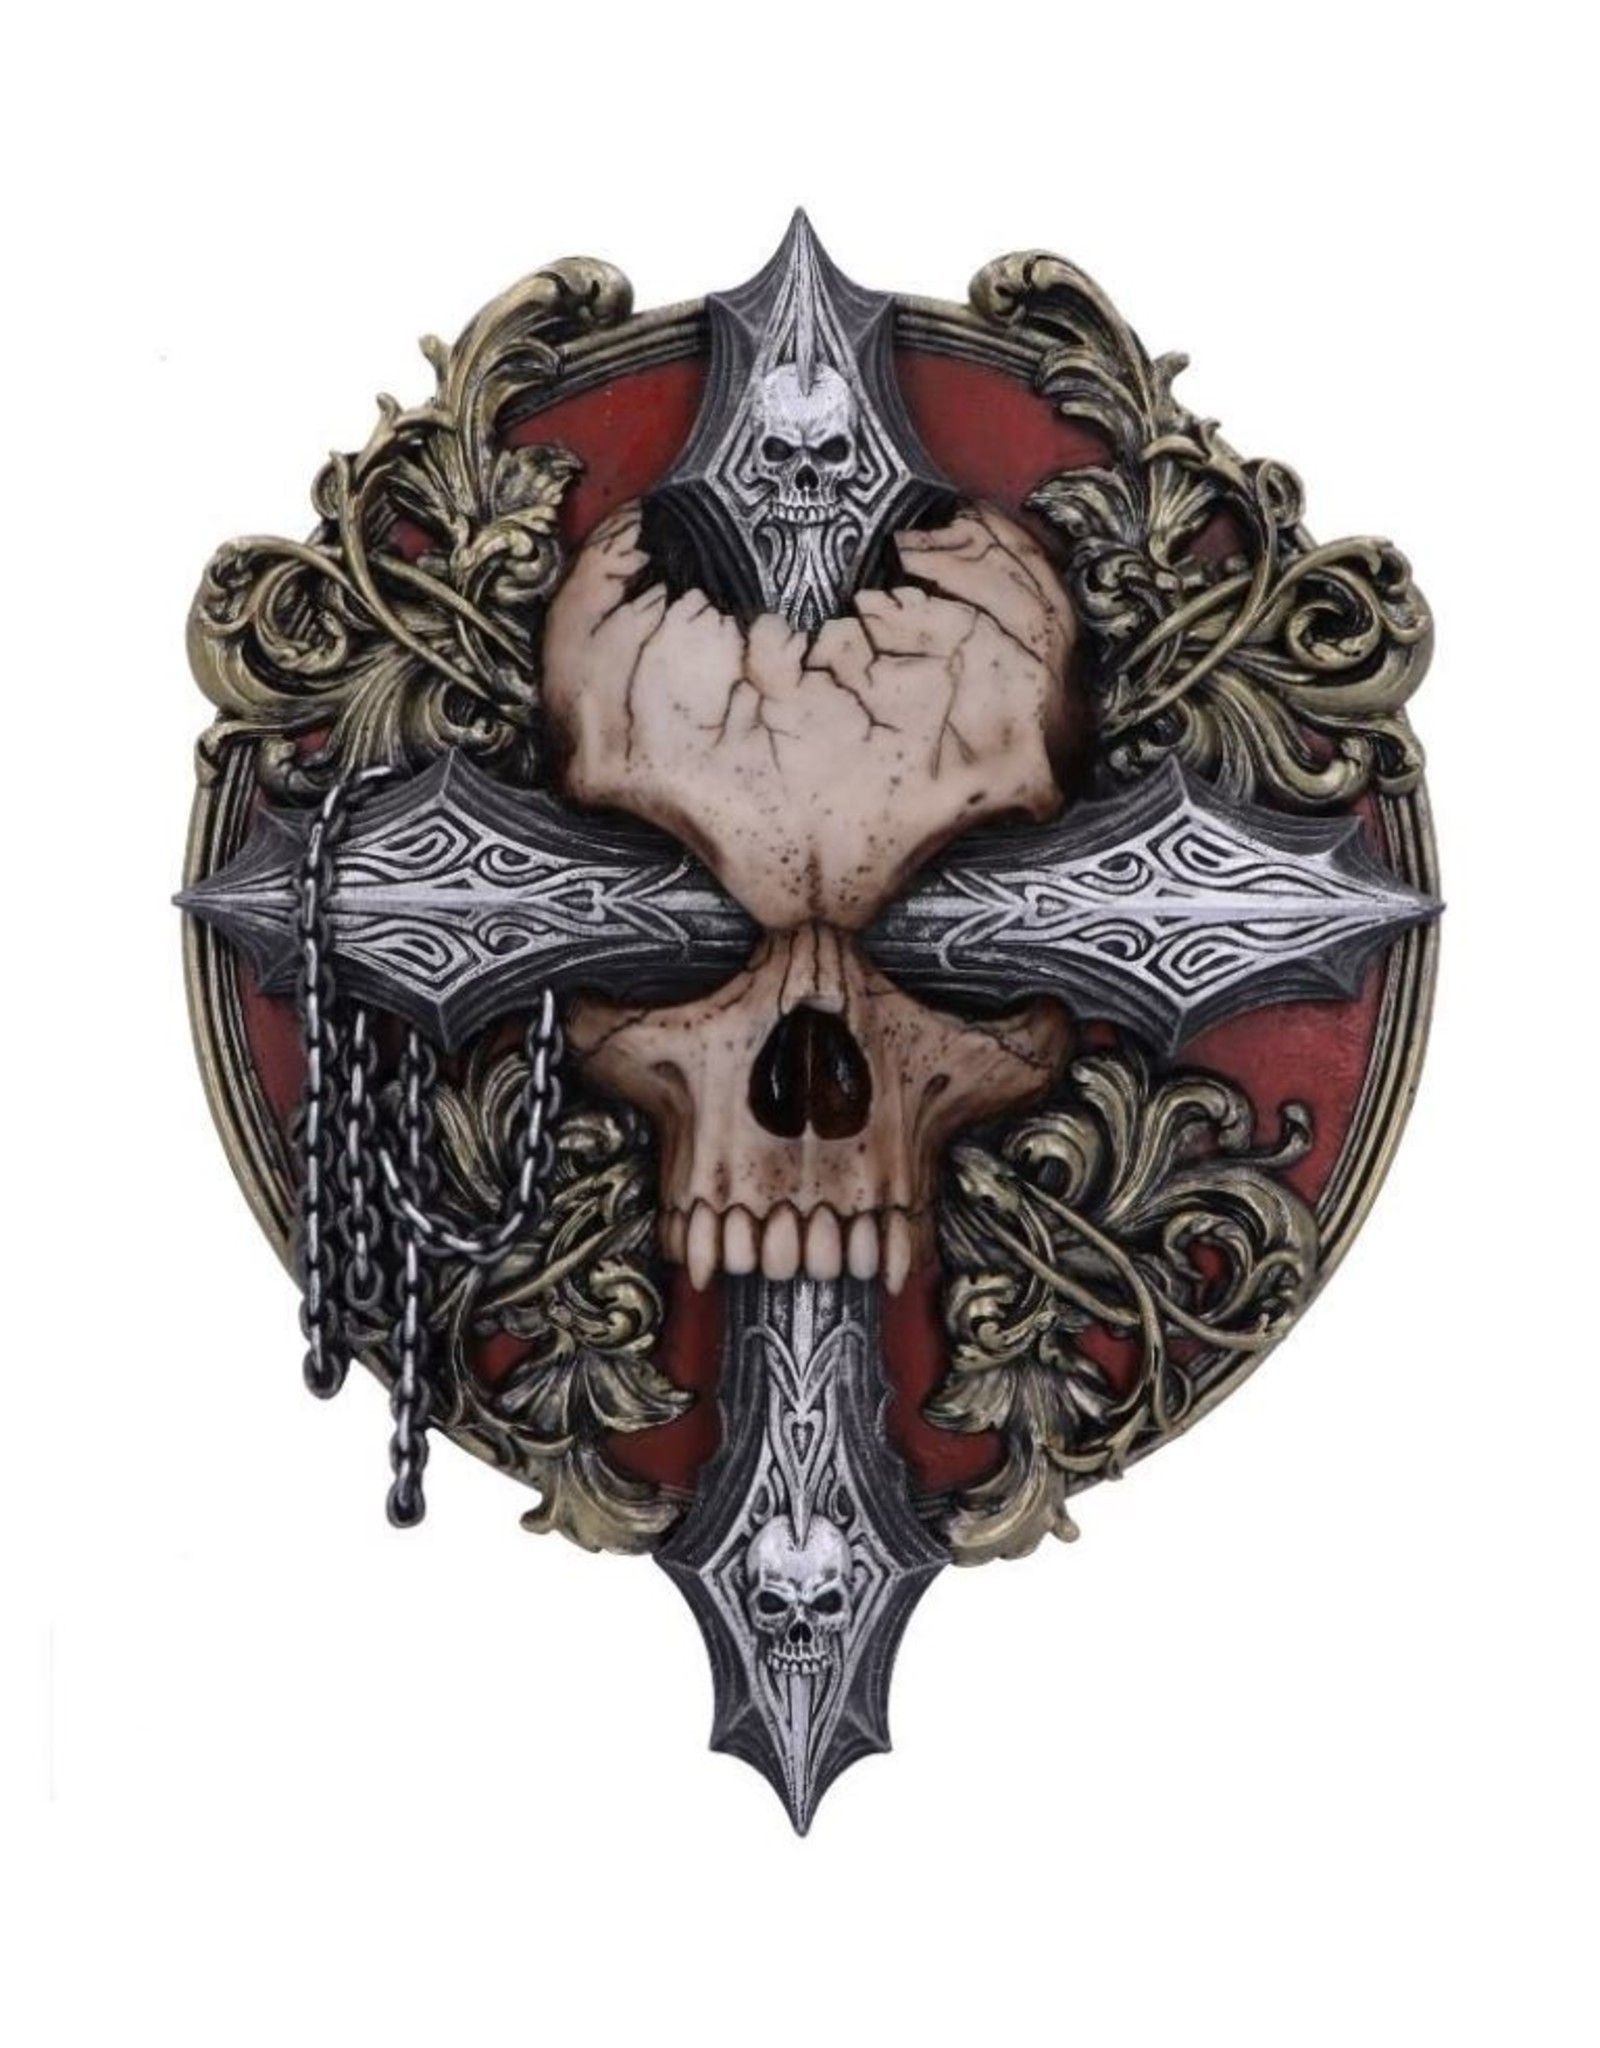 Spiral Giftware & Lifestyle - Cross of Darkness Baroque Skull Wall Plaque - Spiral